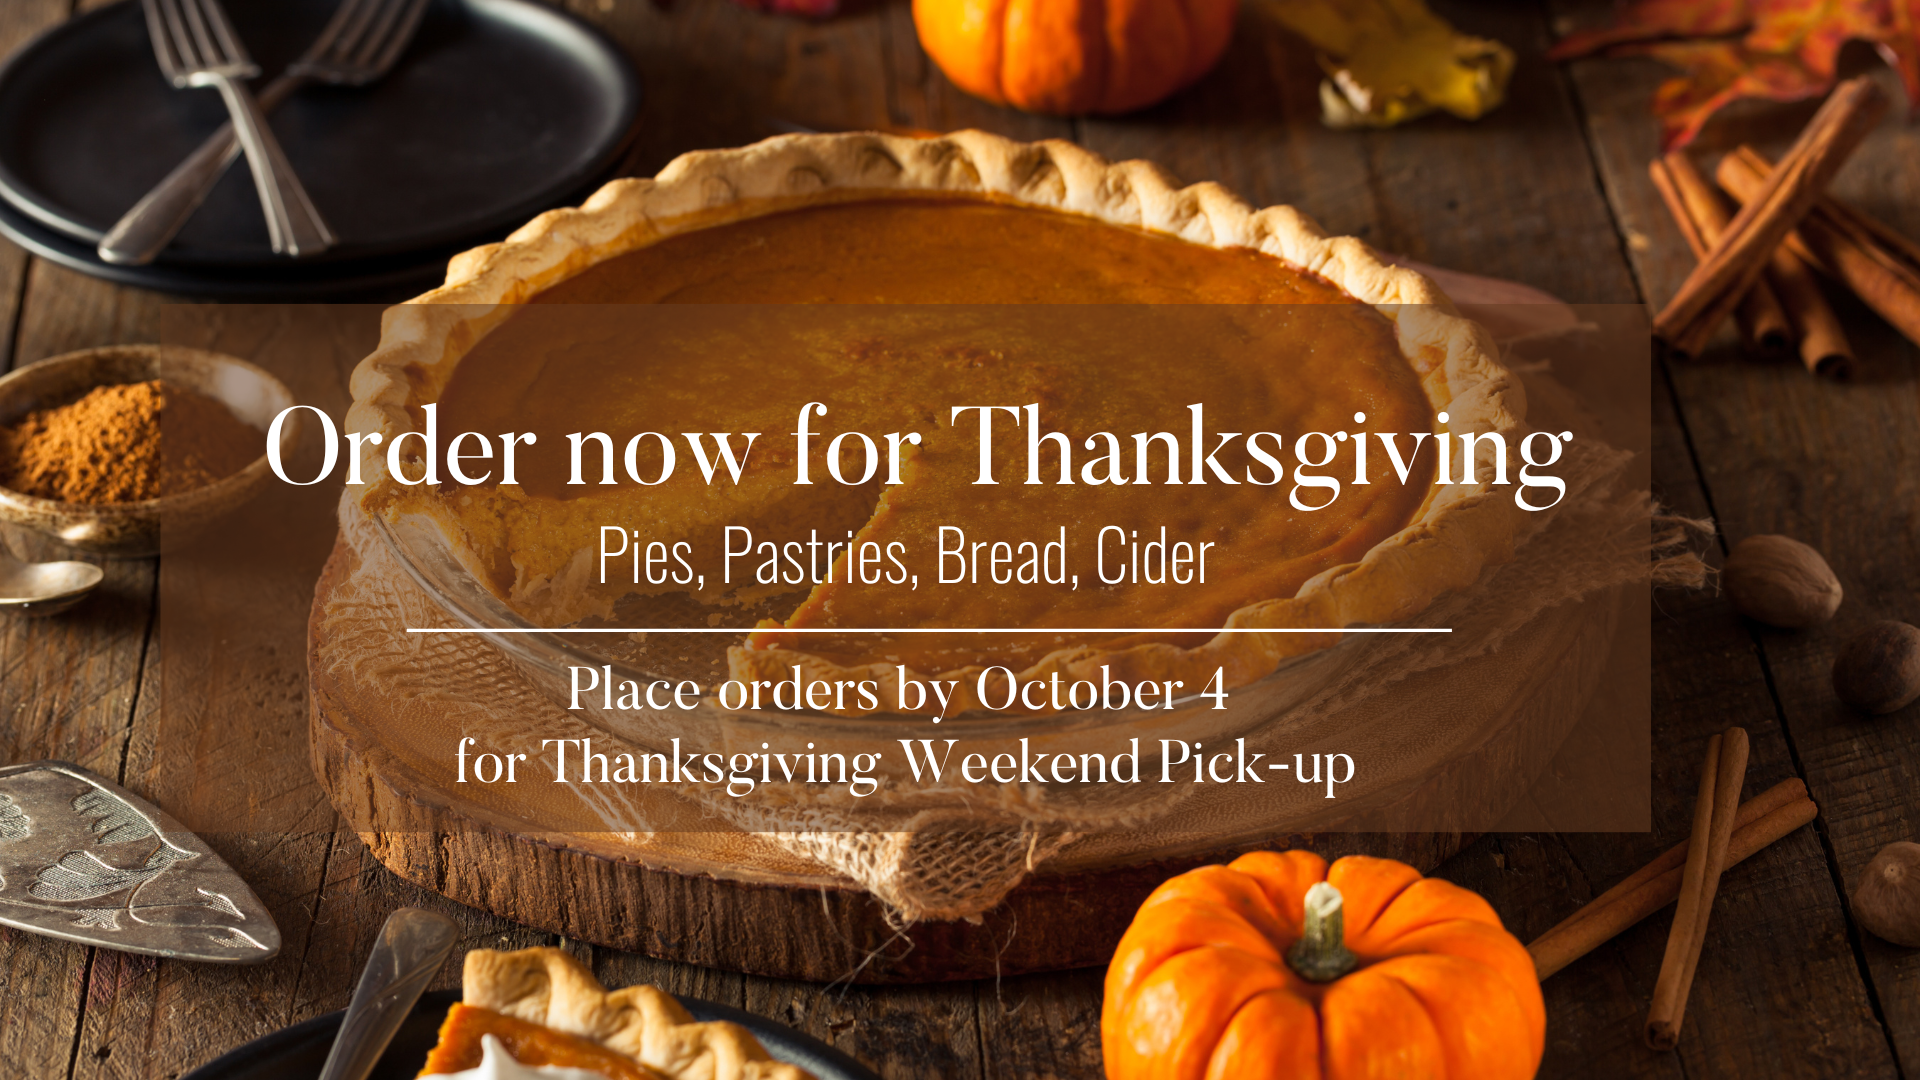 Order now for Thanksgiving Weekend